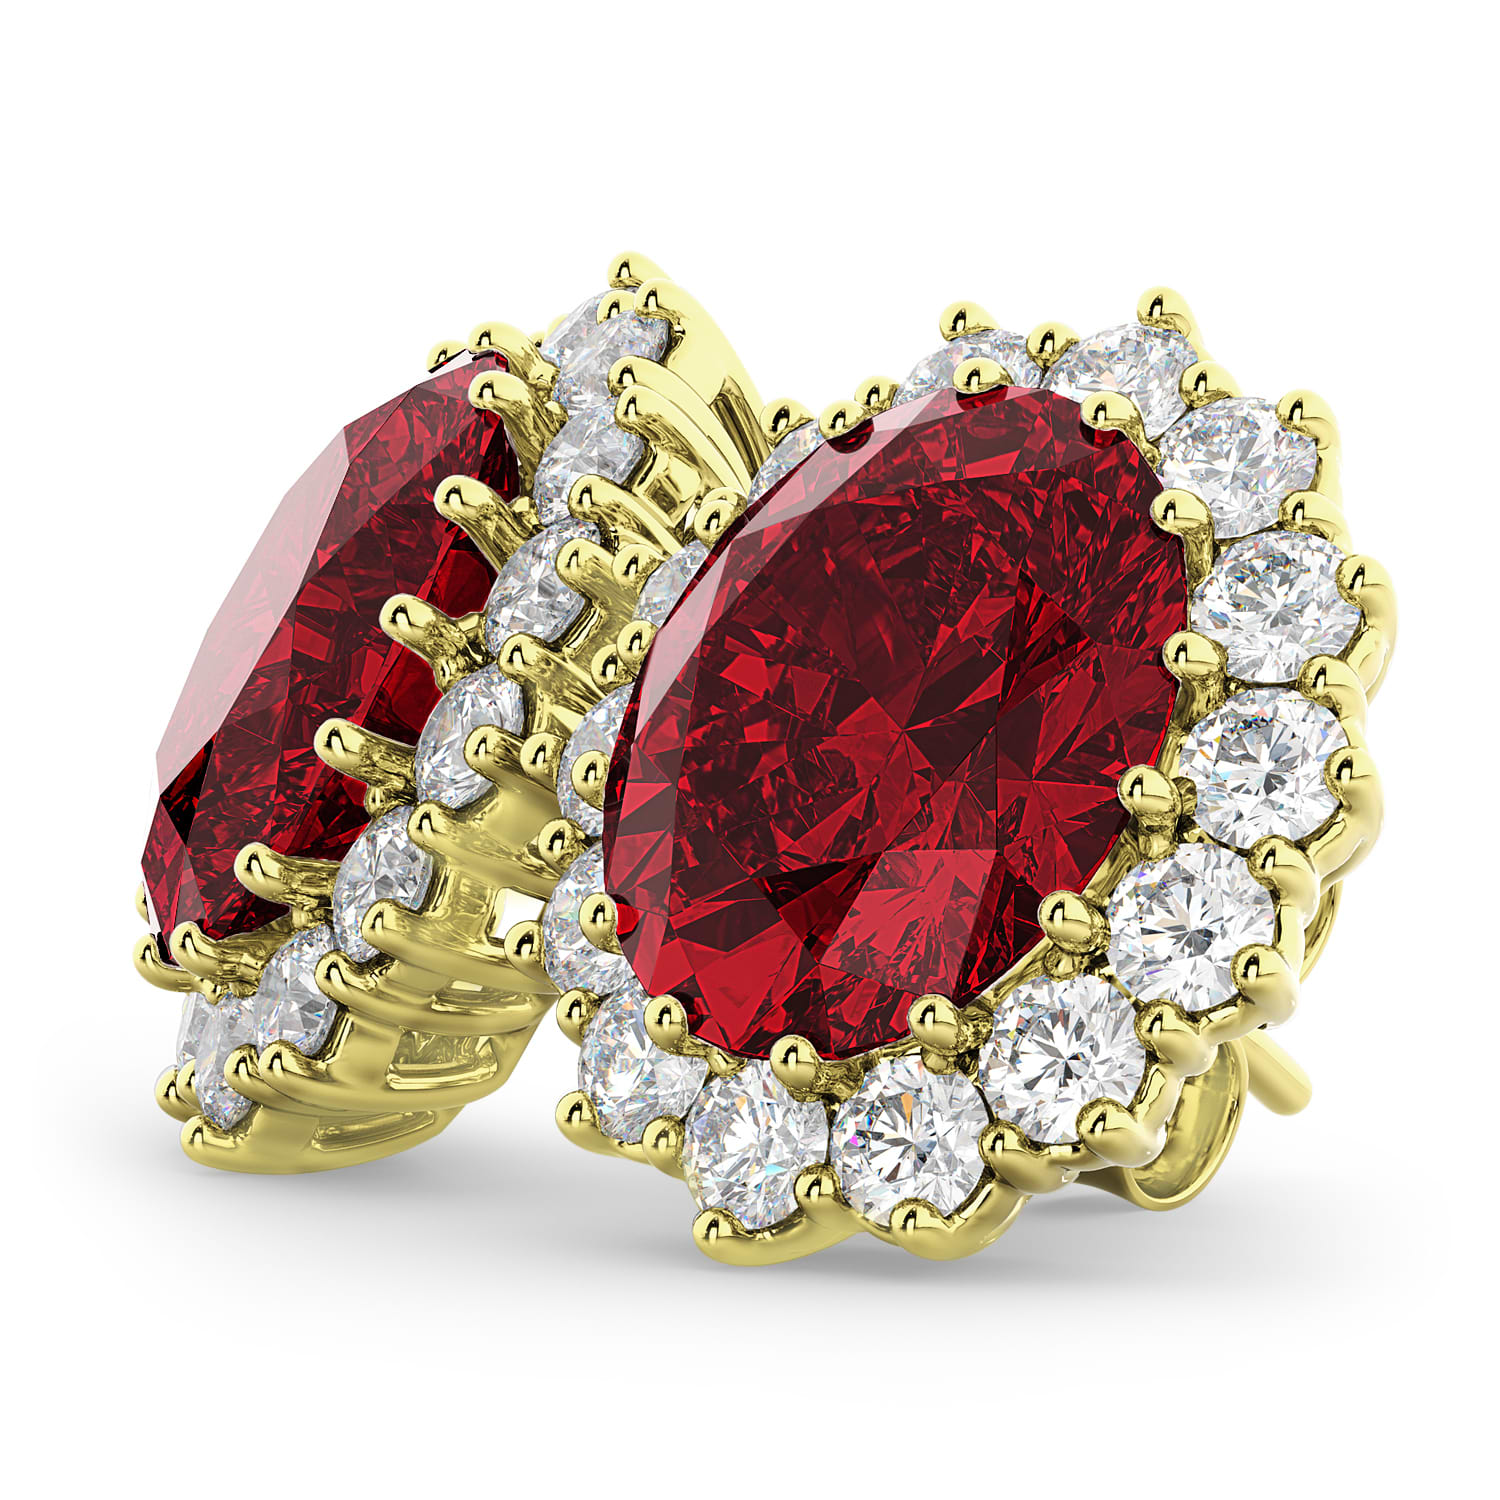 Oval Lab Ruby and Diamond Earrings 14k Yellow Gold (10.80ctw)